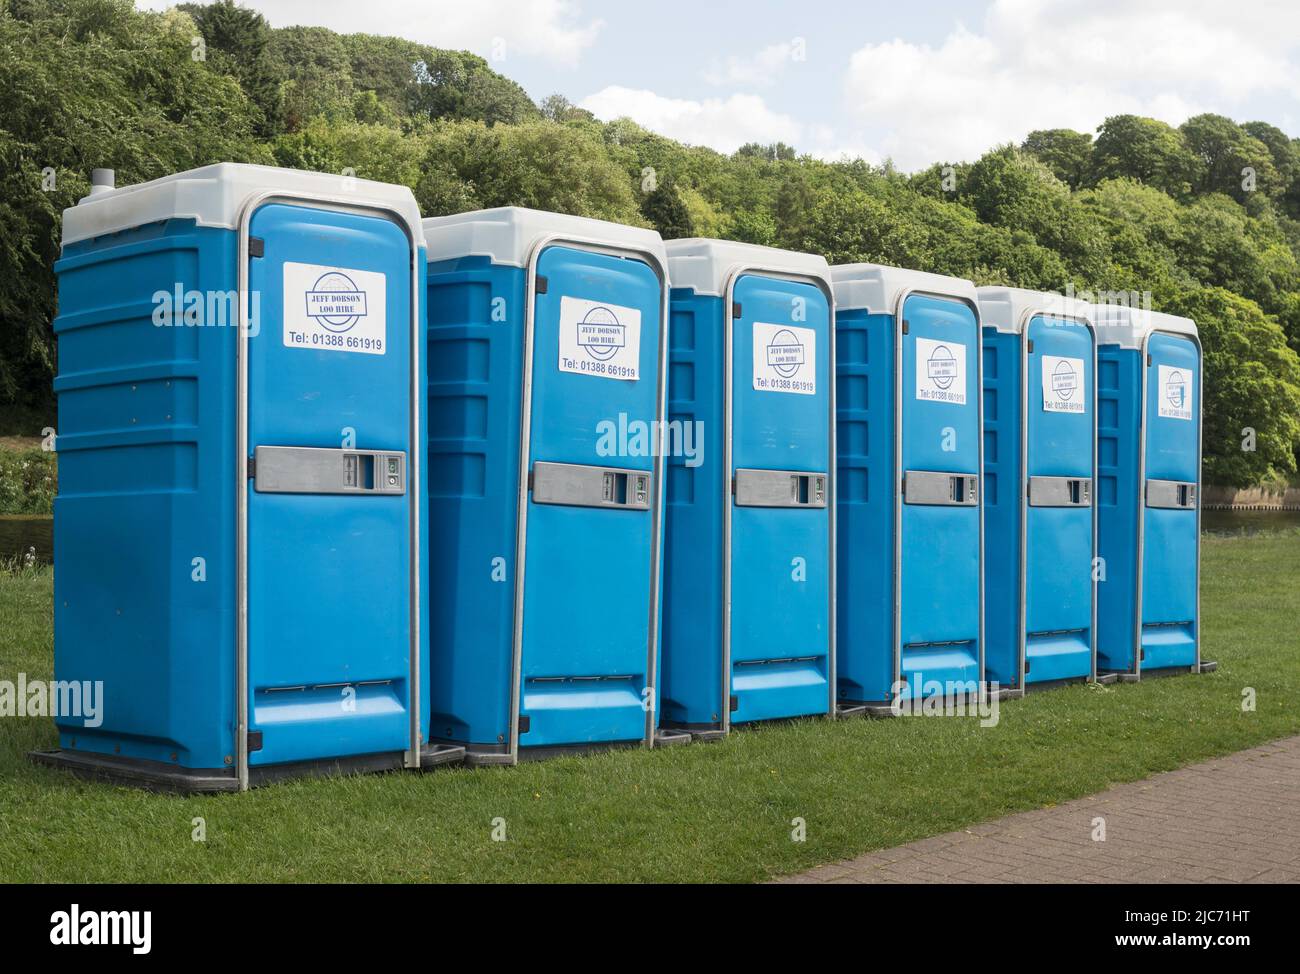 A row of portable toilets or loos at a spectator event, England, UK Stock Photo